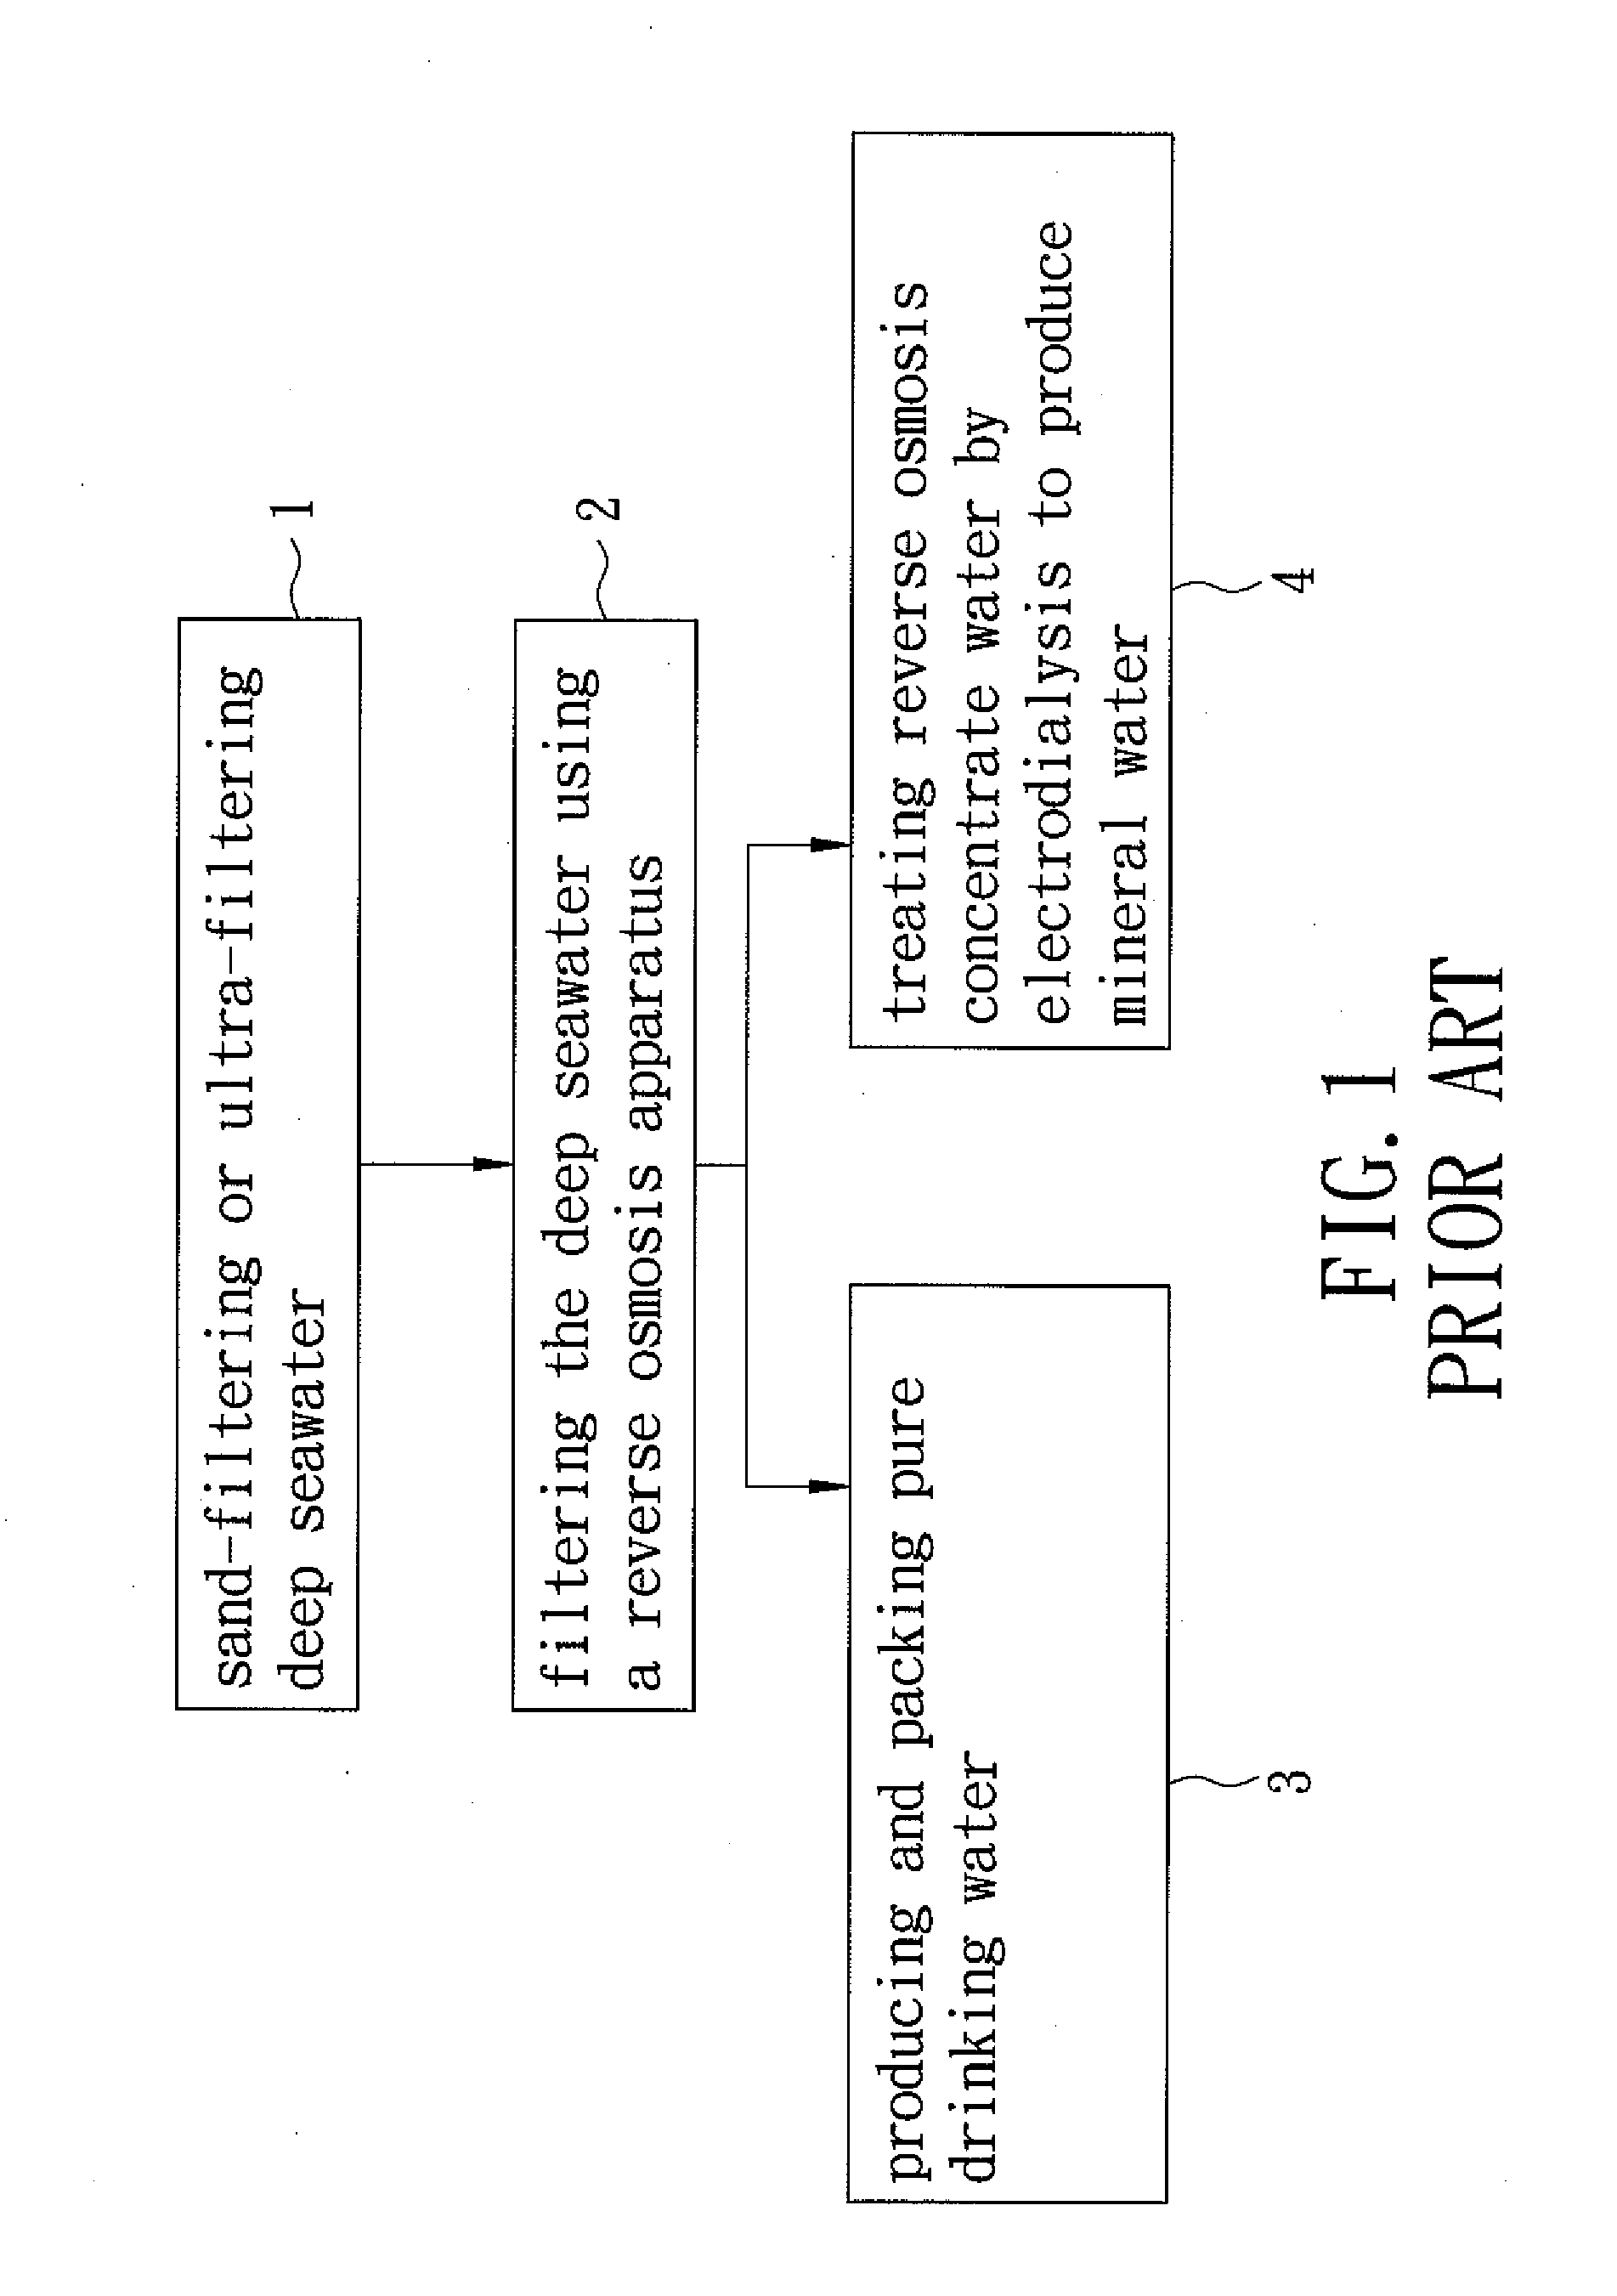 Method for Making Reverse Osmosis Permeate Water and Mineral Water From Deep Seawater